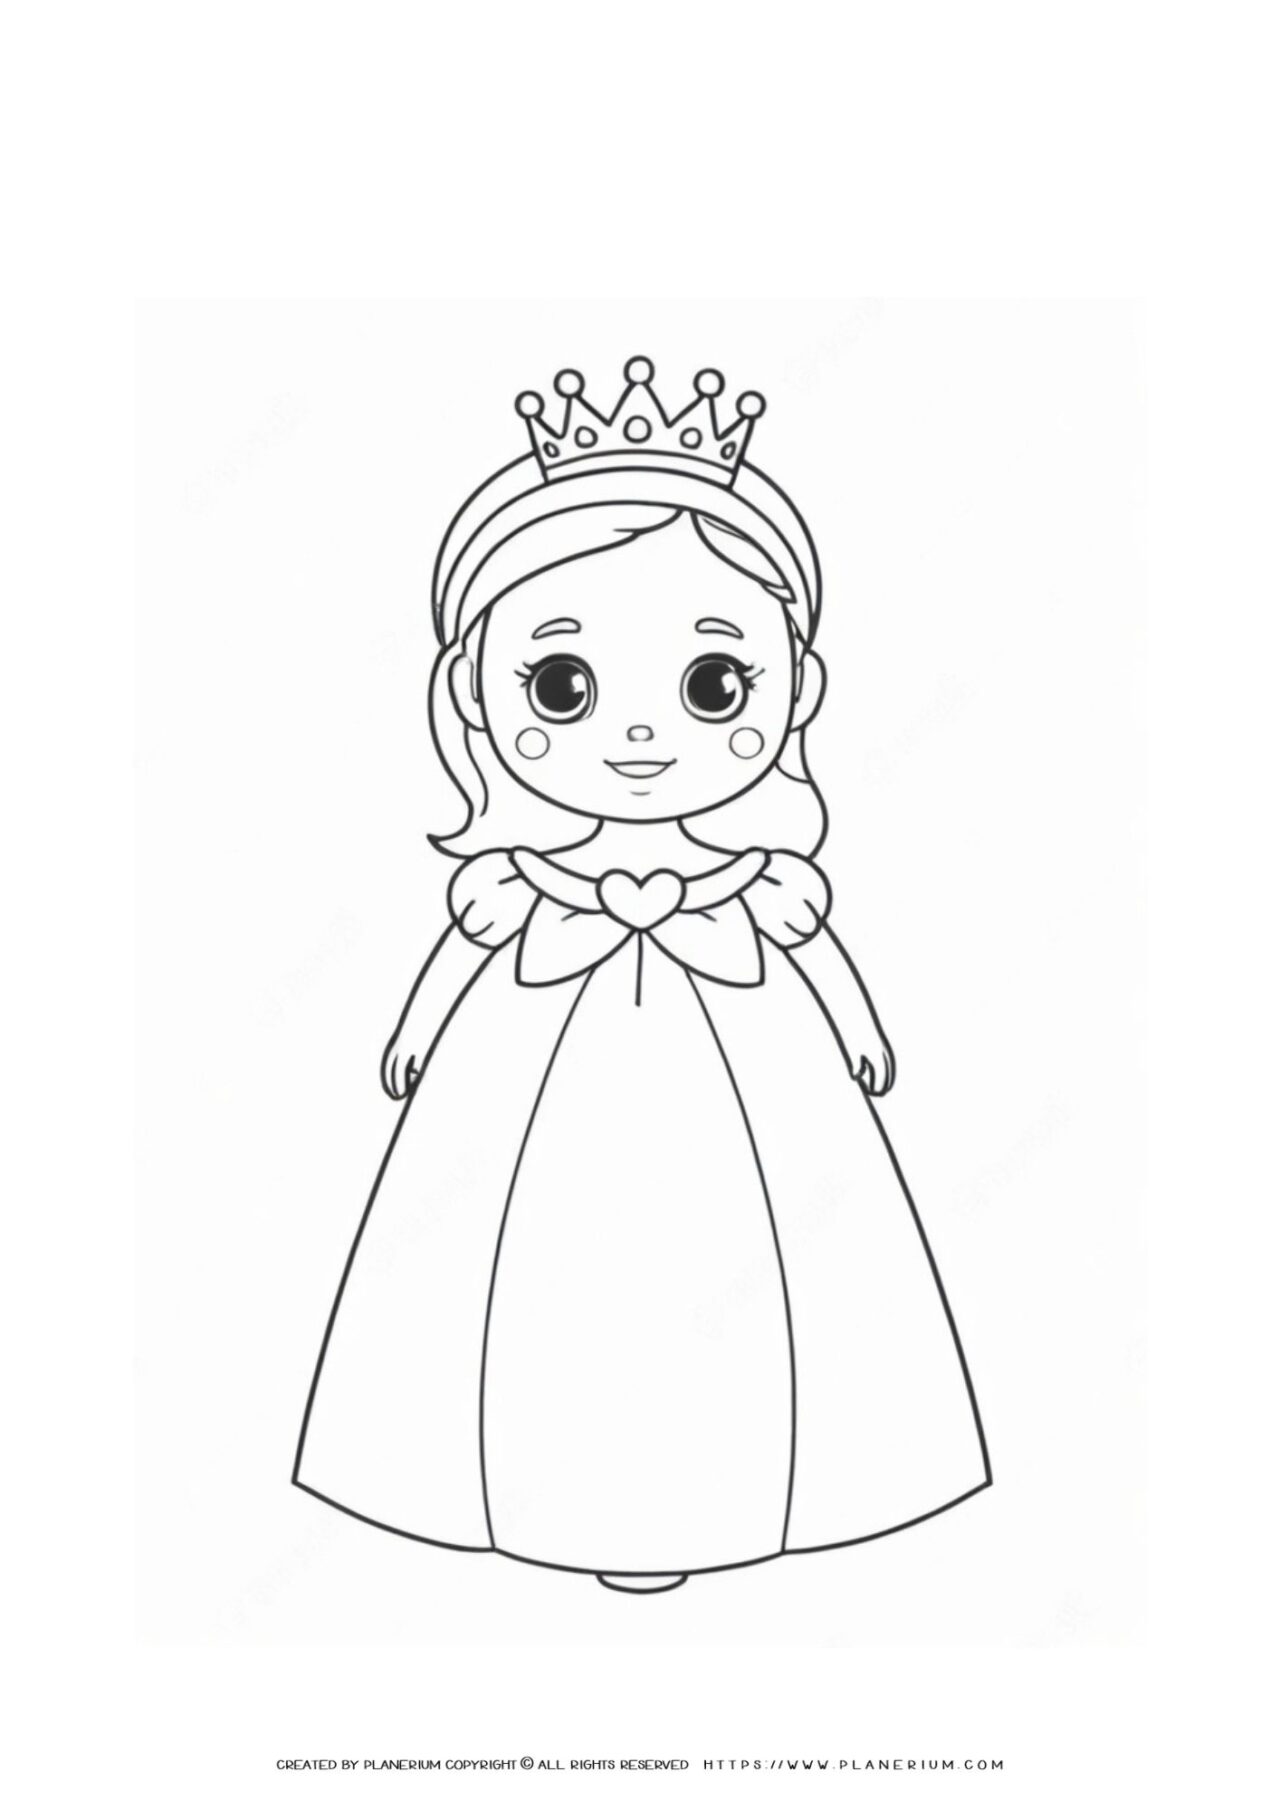 Coloring page of a cartoon princess outline.